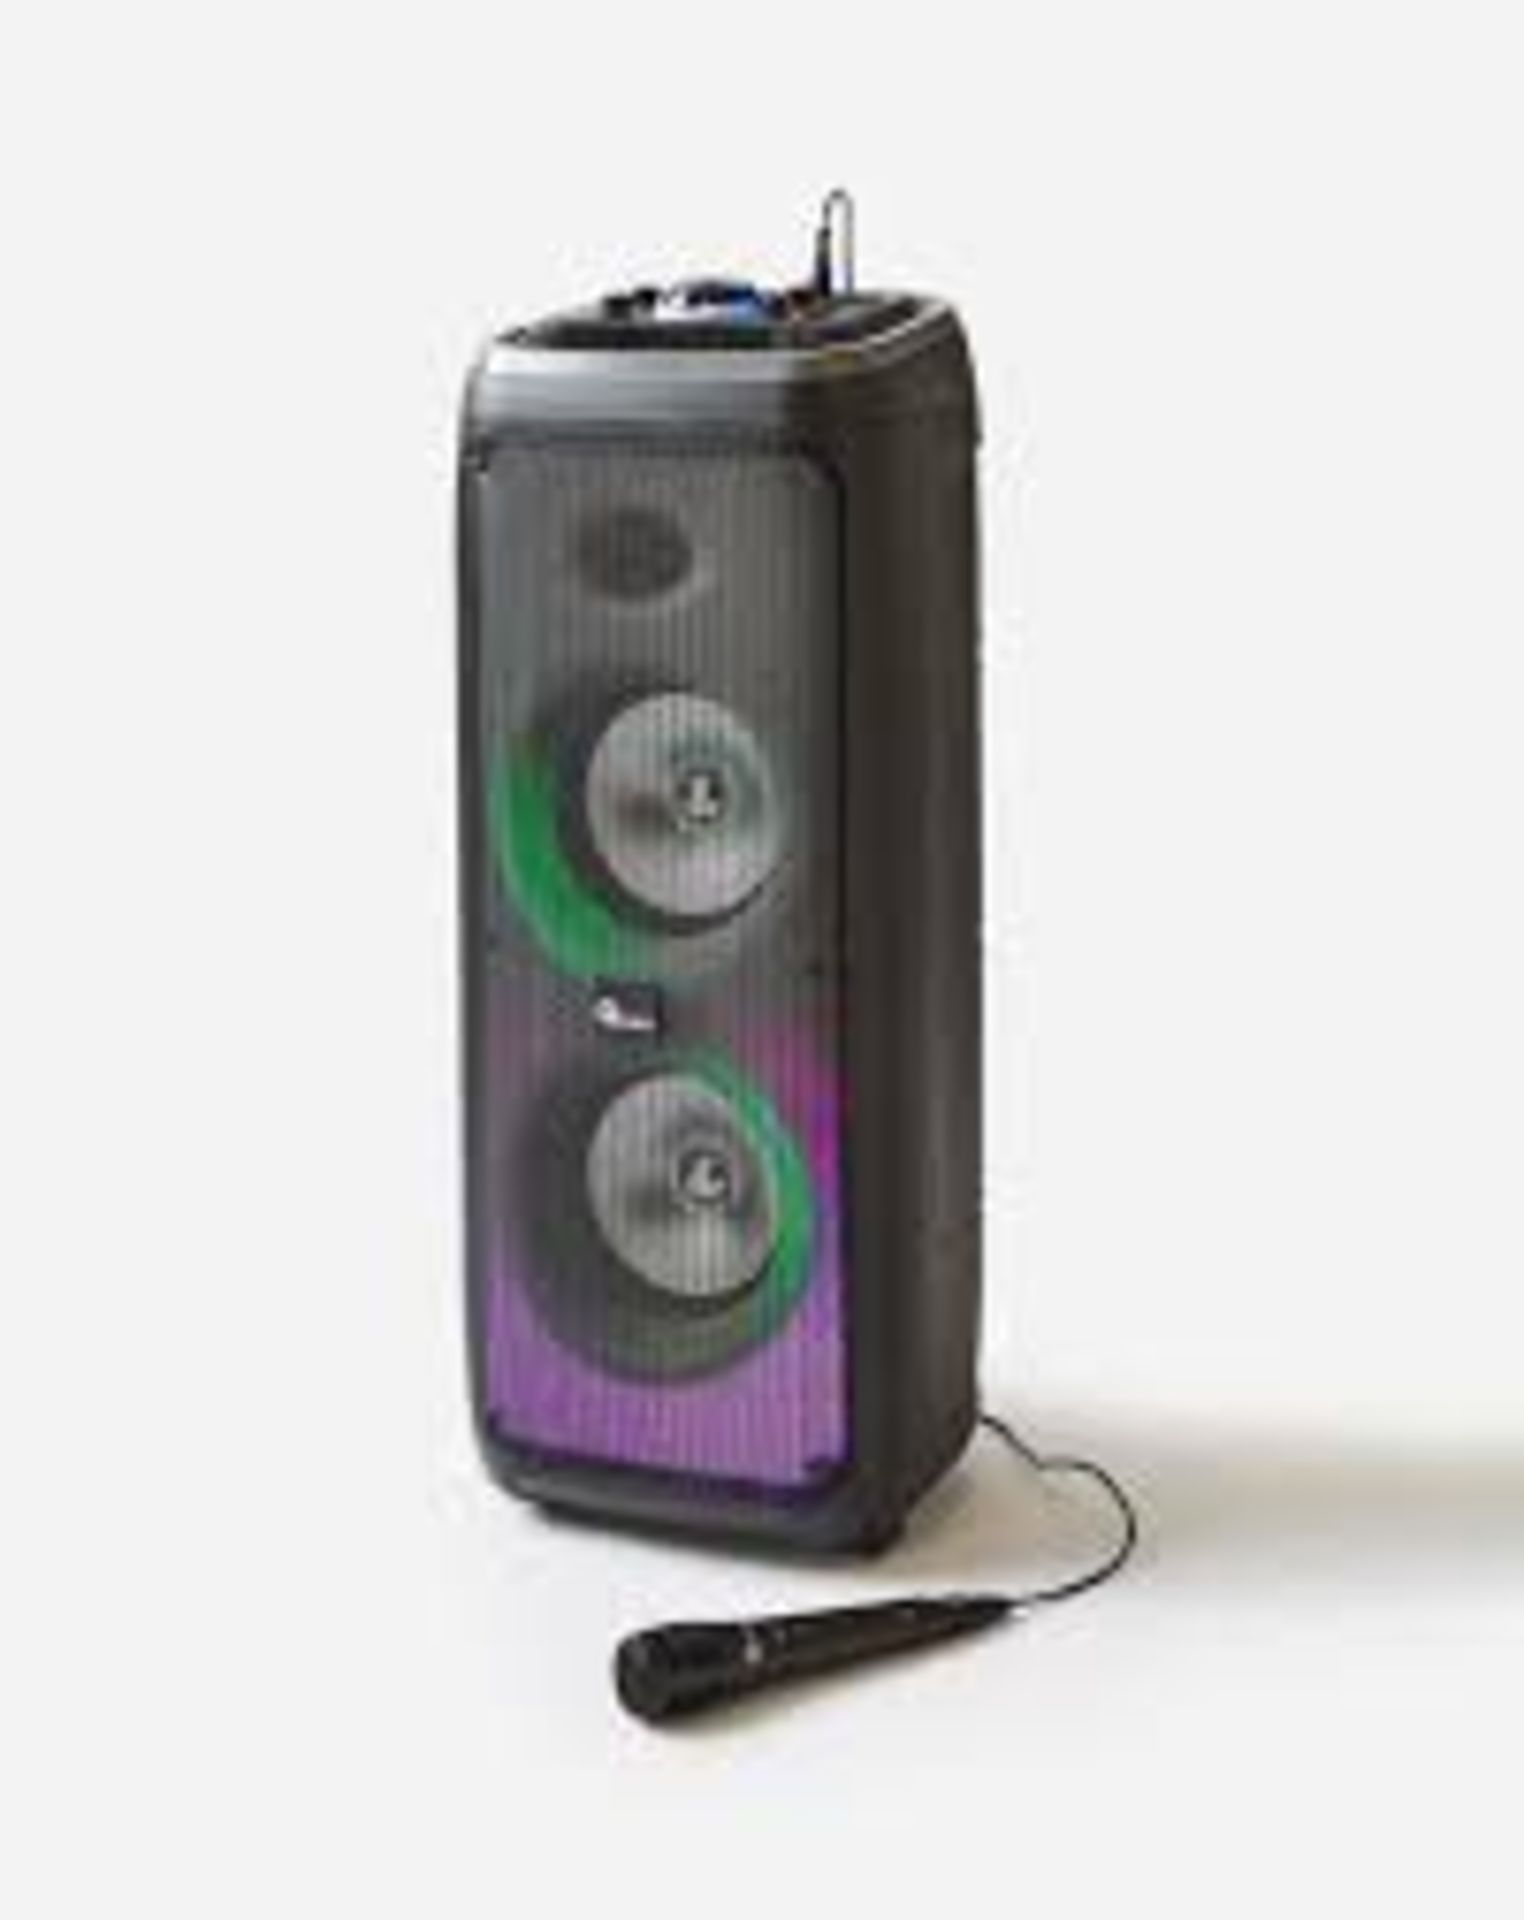 Audial Party 40w Speaker. -SR6. The Audial Pulse party speaker will pack a punch of sound at any